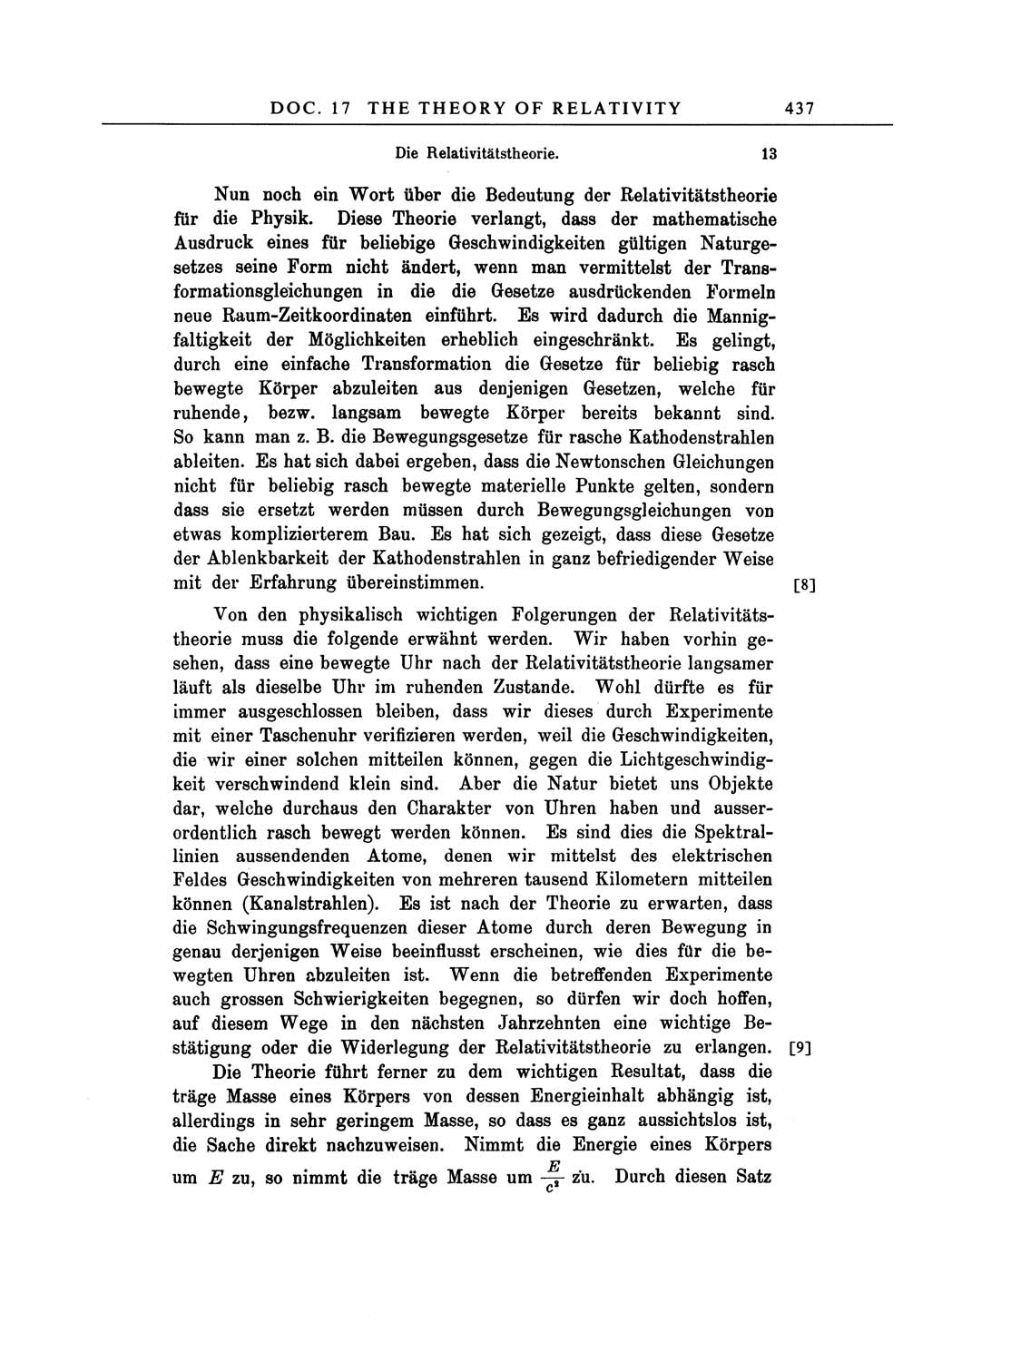 Volume 3: The Swiss Years: Writings 1909-1911 page 437